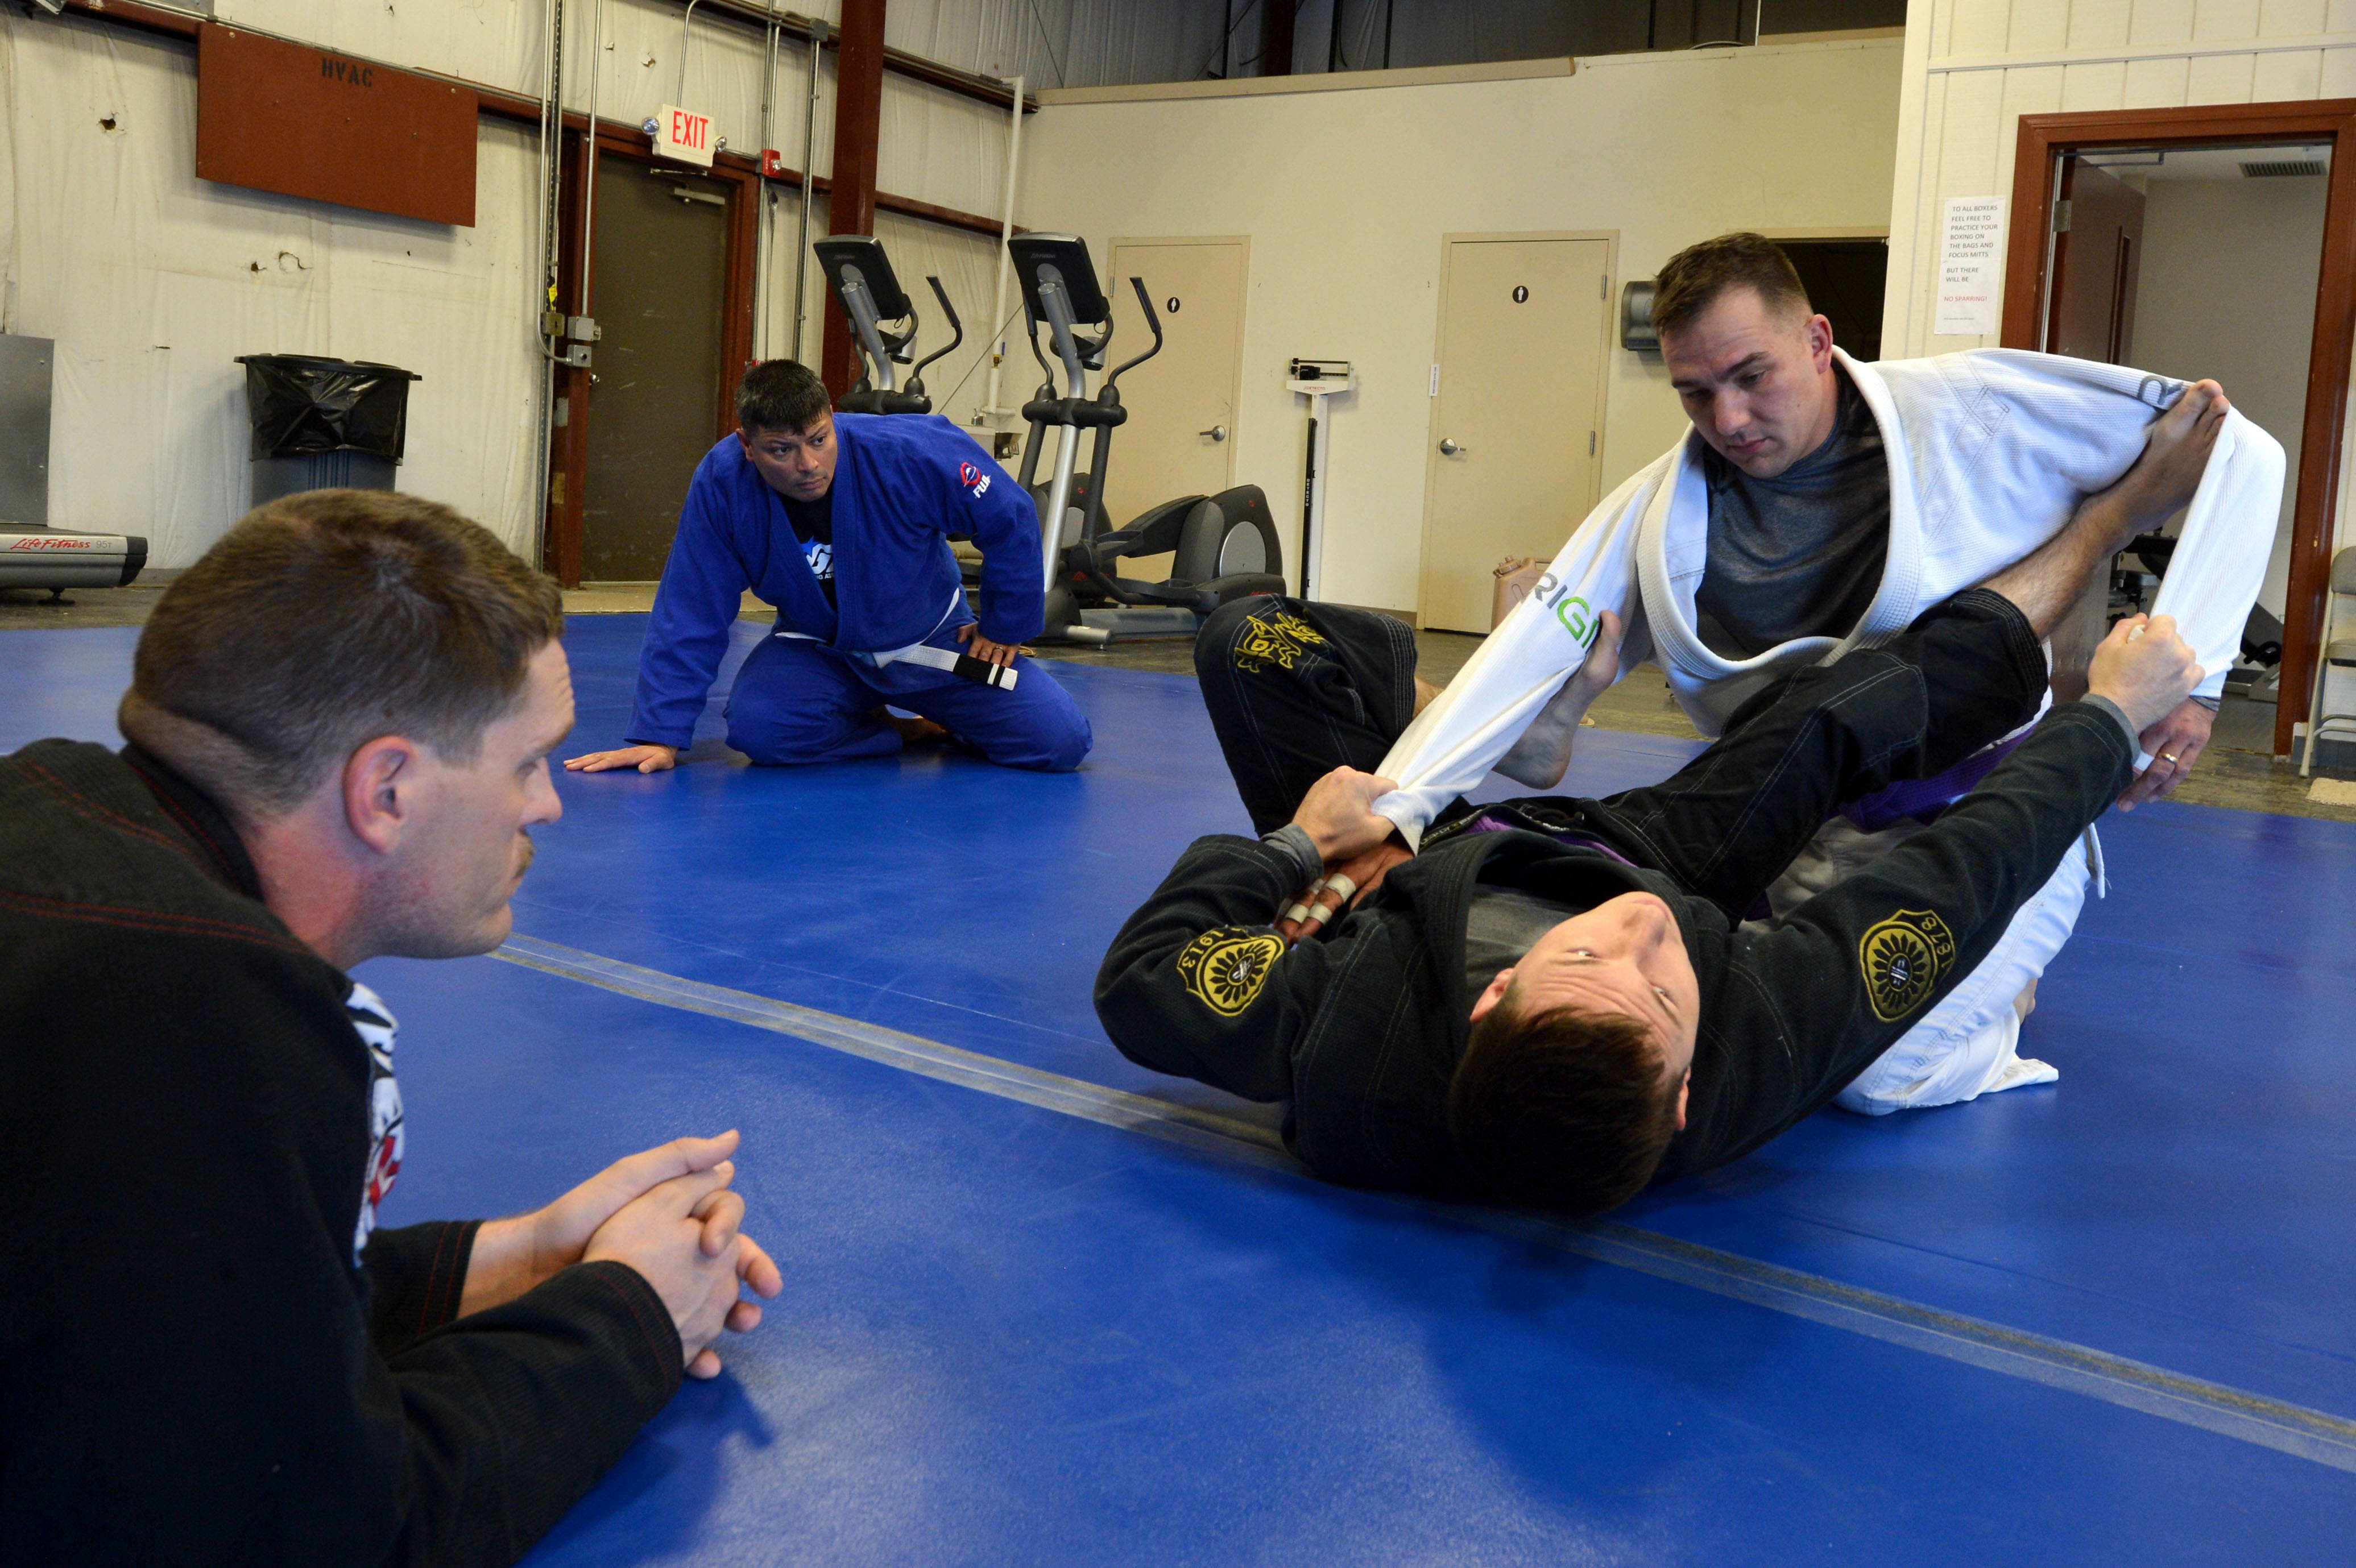 New Combatives House offers fitness alternatives > Shaw 